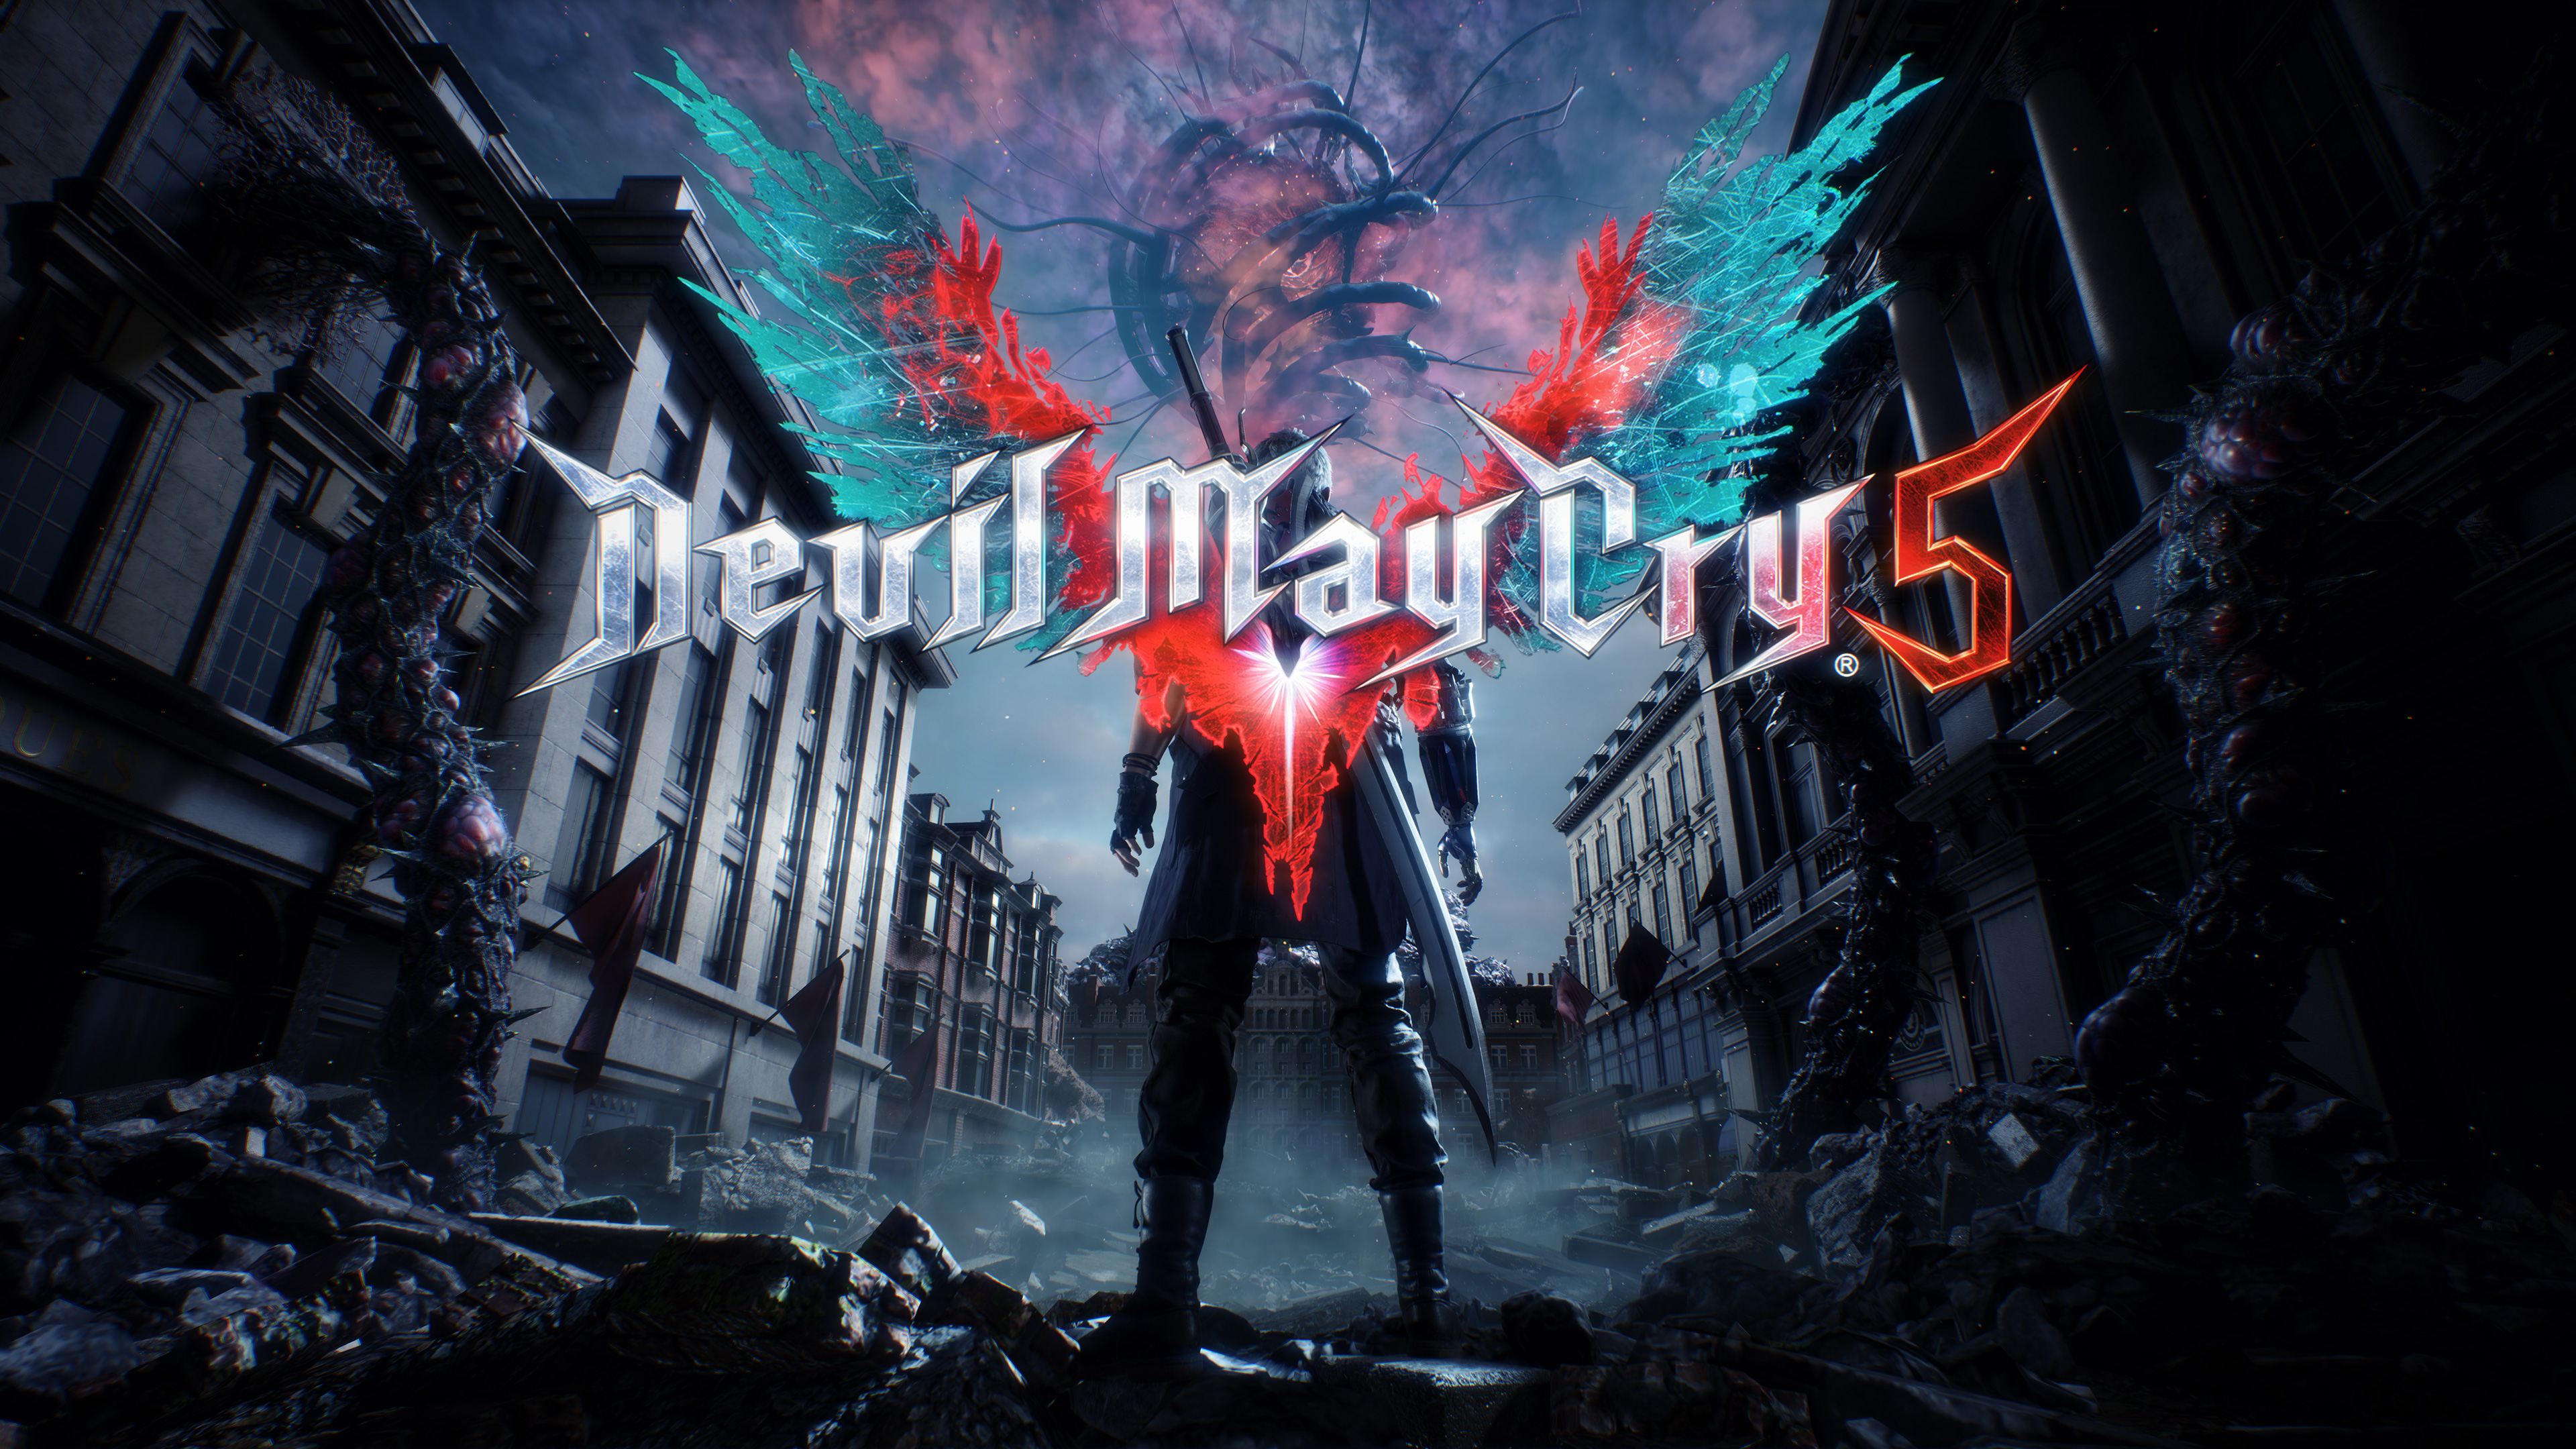 devil may cry 5 wallpaper,action adventure game,darkness,pc game,movie,fictional character